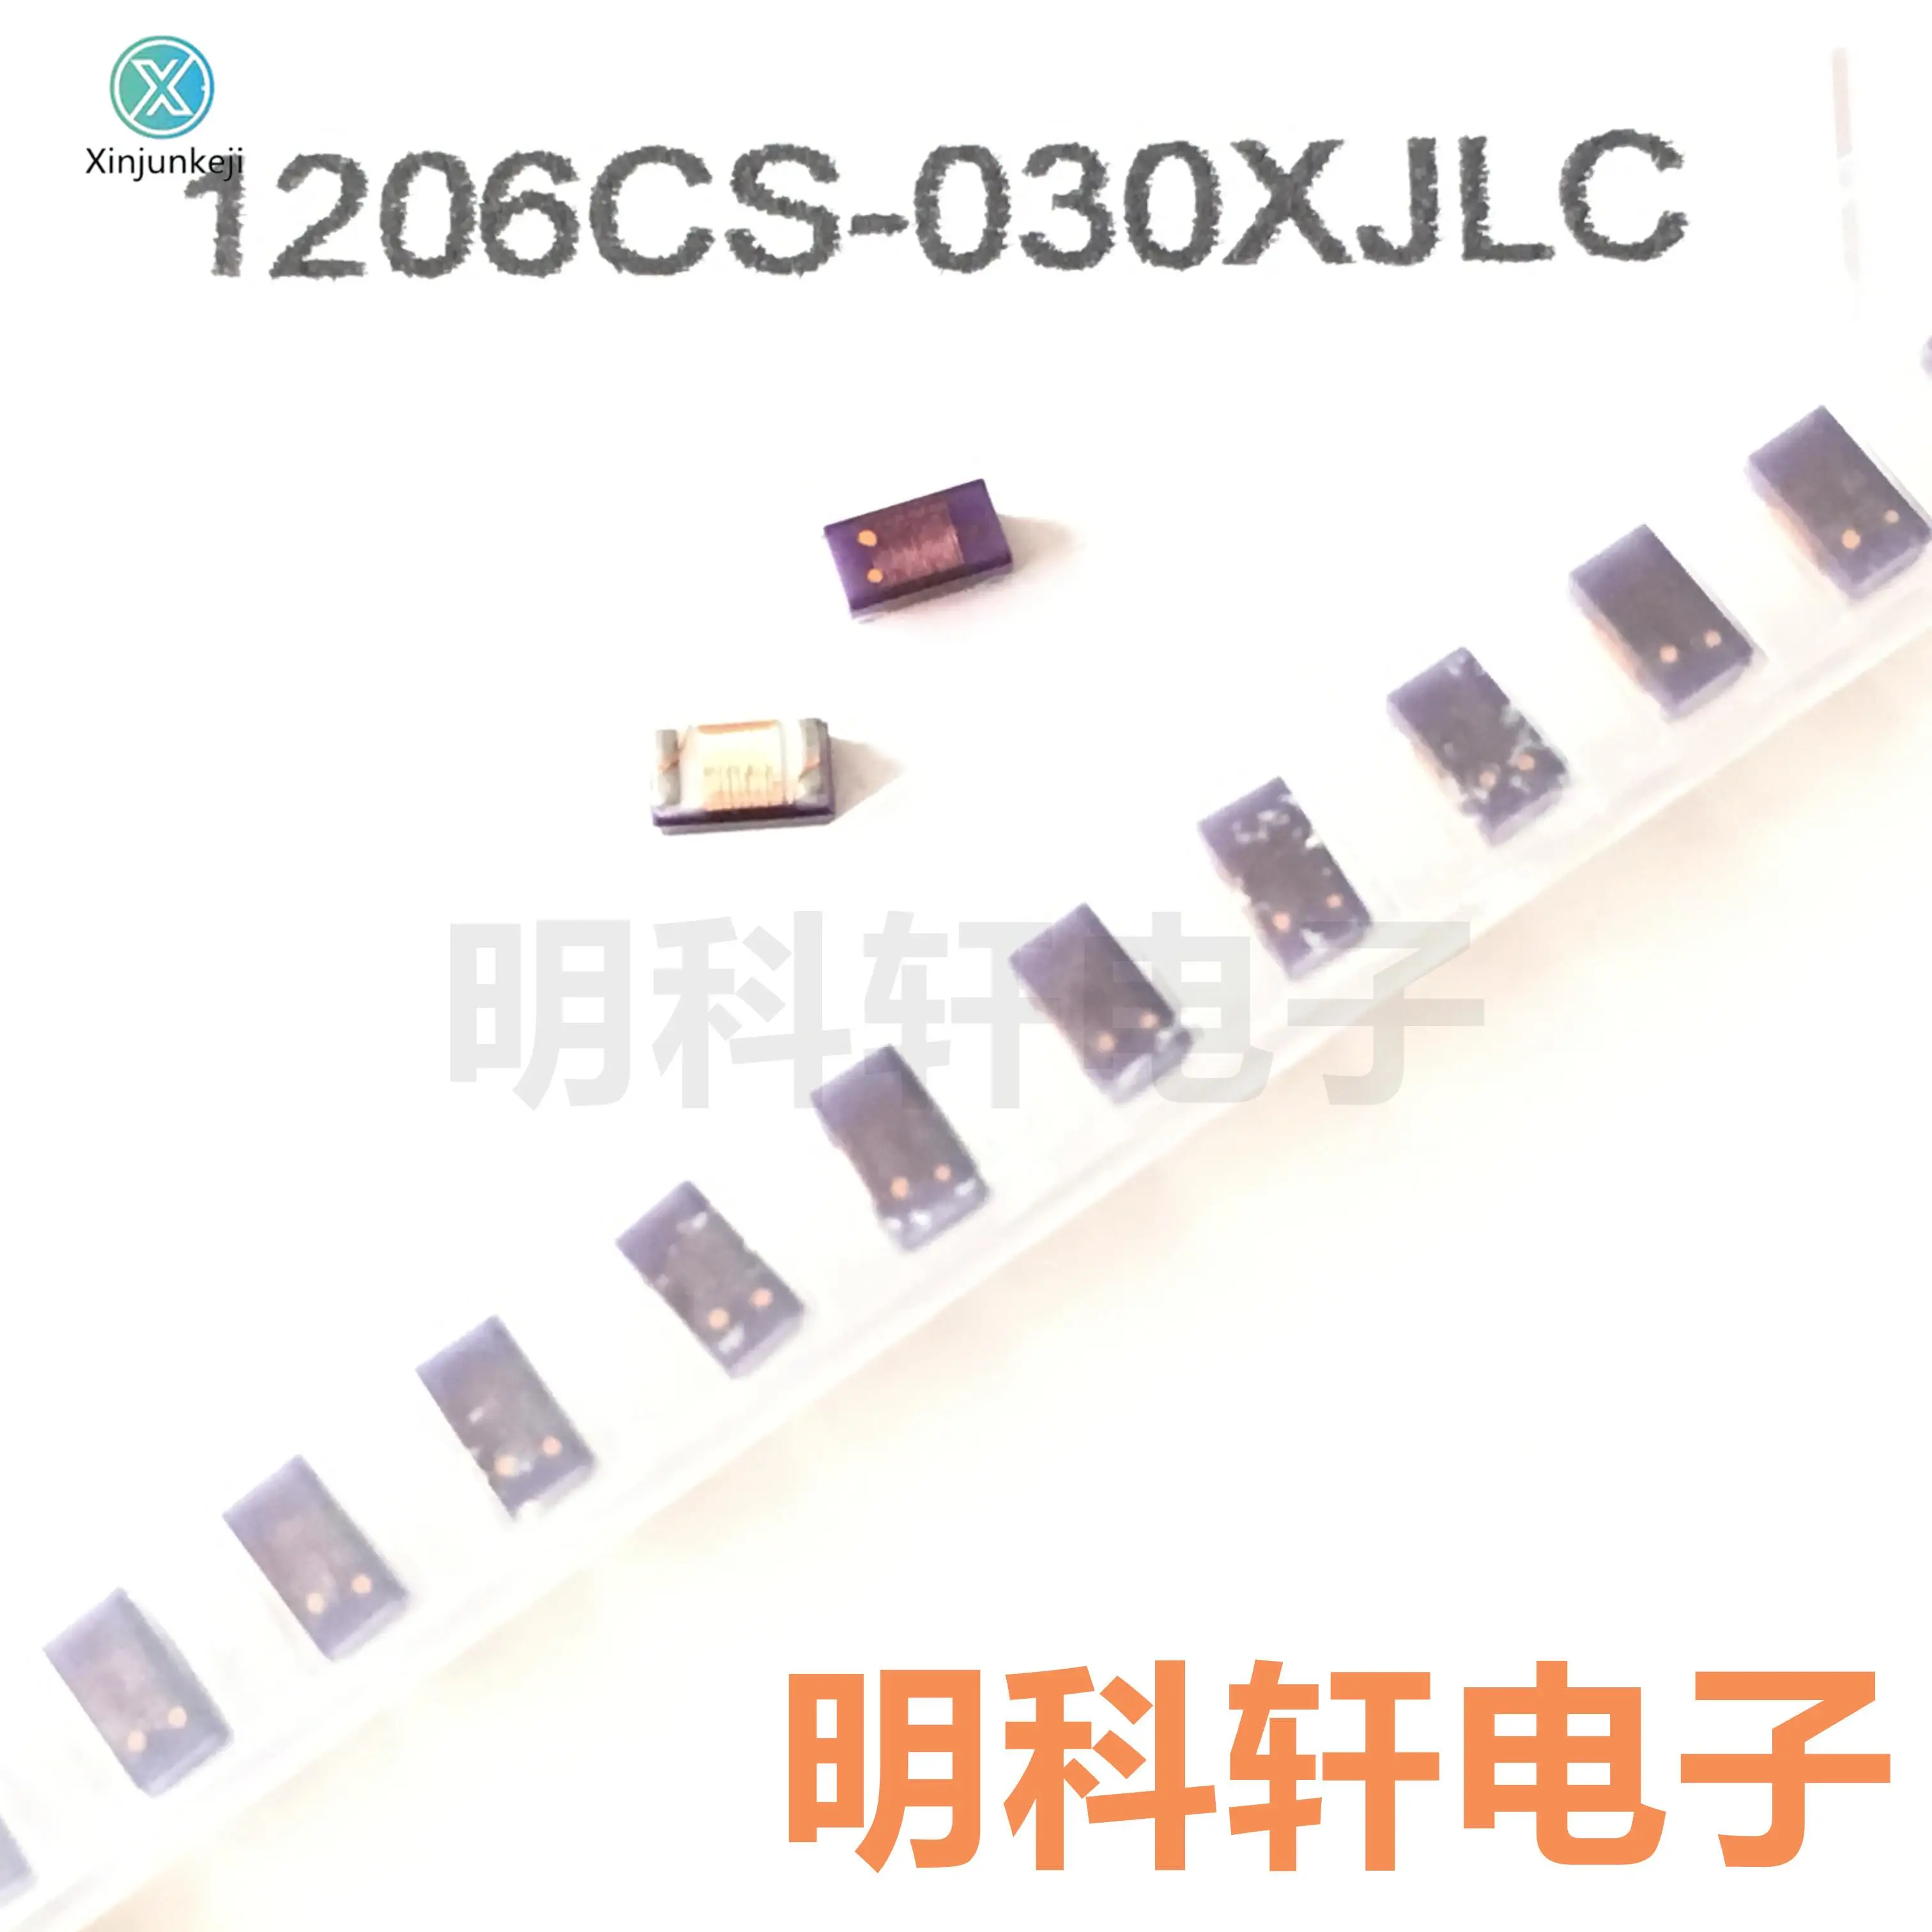 

30pcs orginal new 1206CS-030XJLC SMD high frequency wire wound inductor 1206 3.3NH